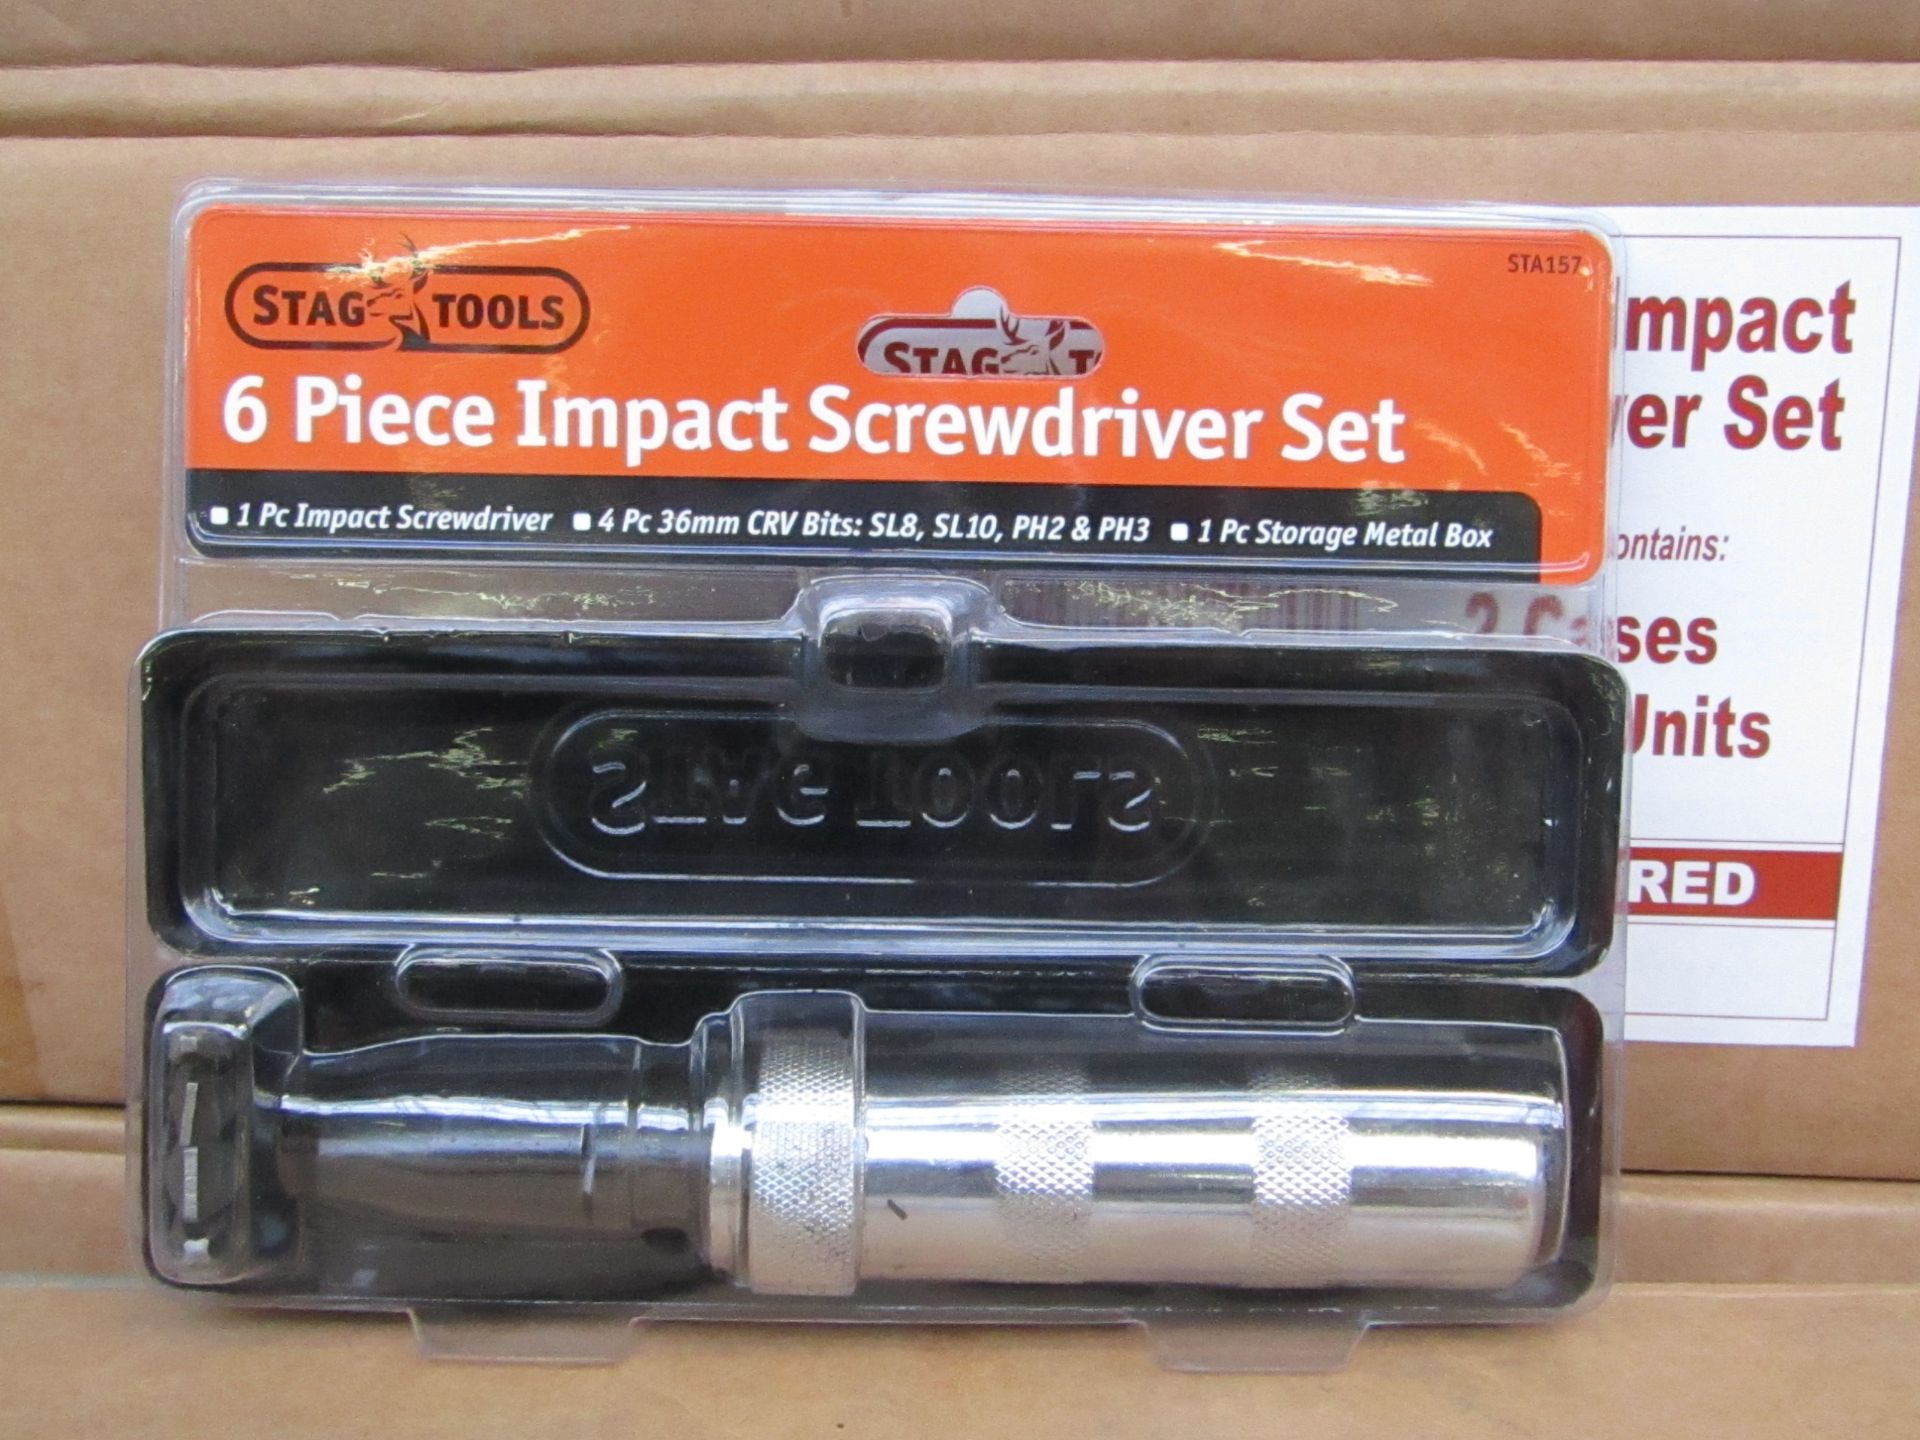 Stag Tools 6 piece impact Screw driver set, new and still blister packed.